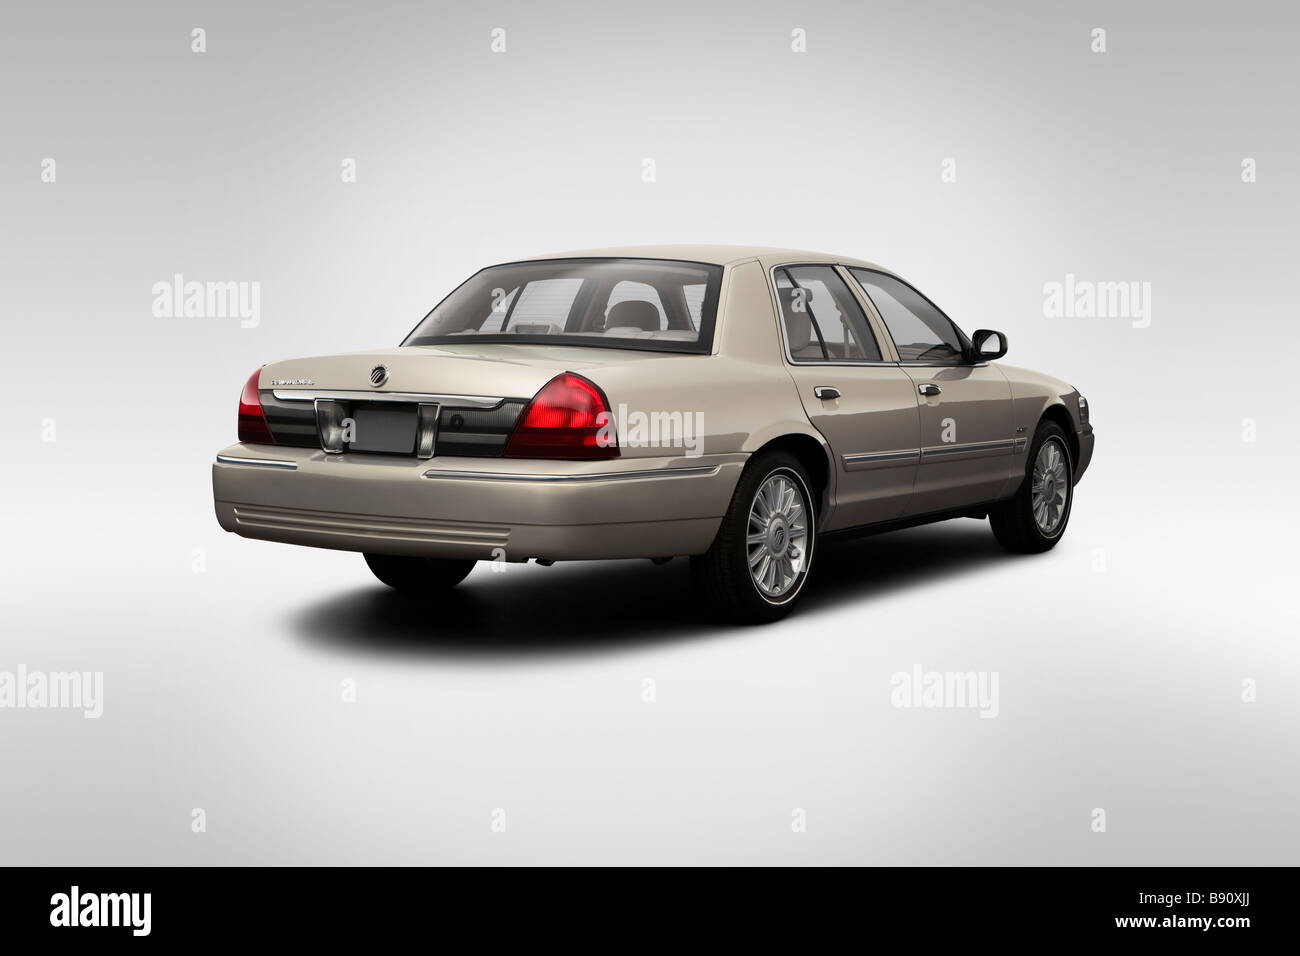 2009 Mercury Grand Marquis LS in Beige - Rear angle view Stock Photo - Alamy